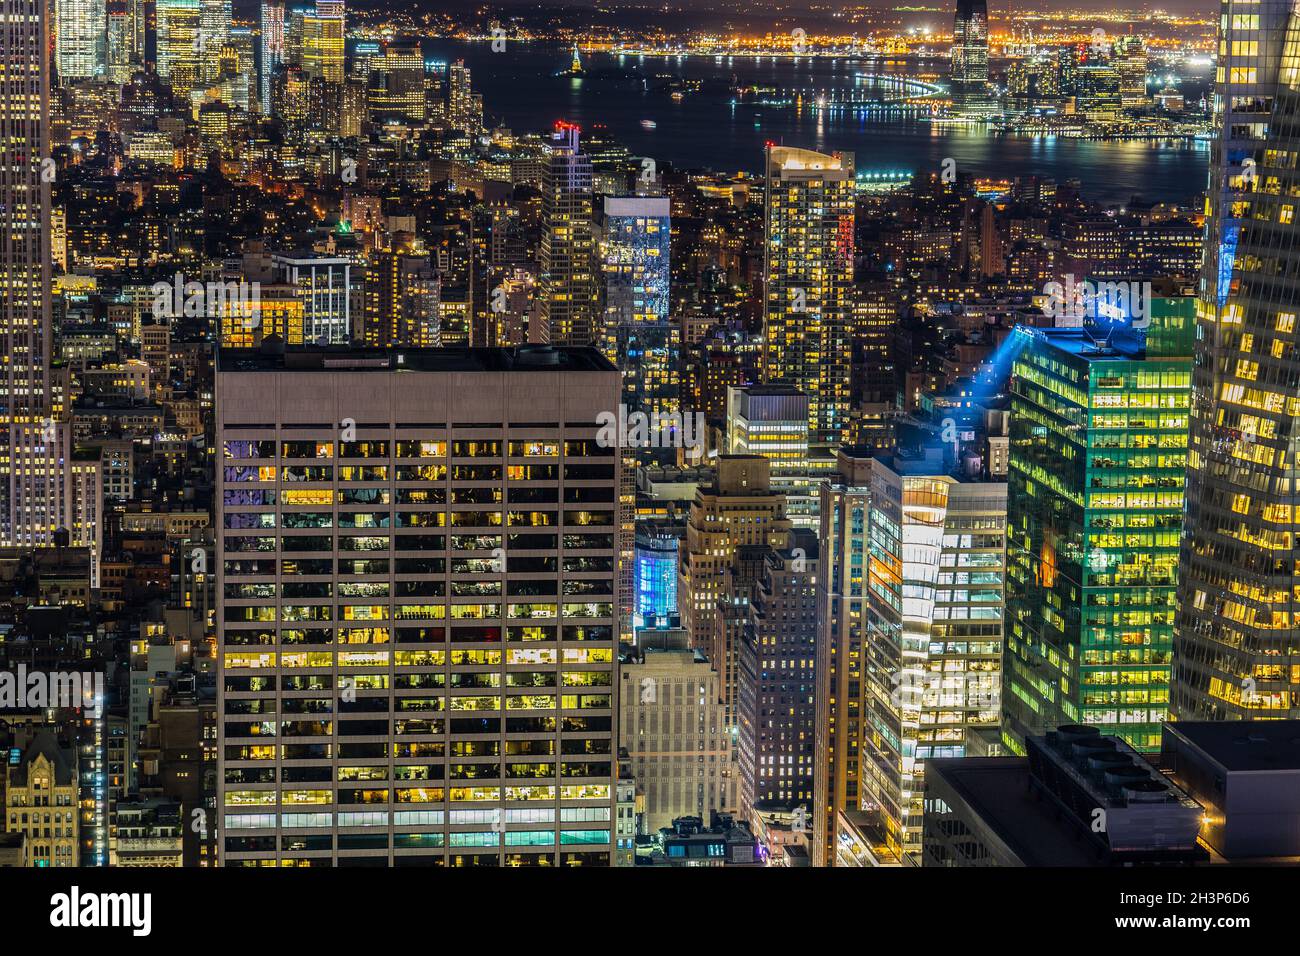 Downtown night view seen from the top of the Rock (Rockefeller Center Observation Deck) Stock Photo